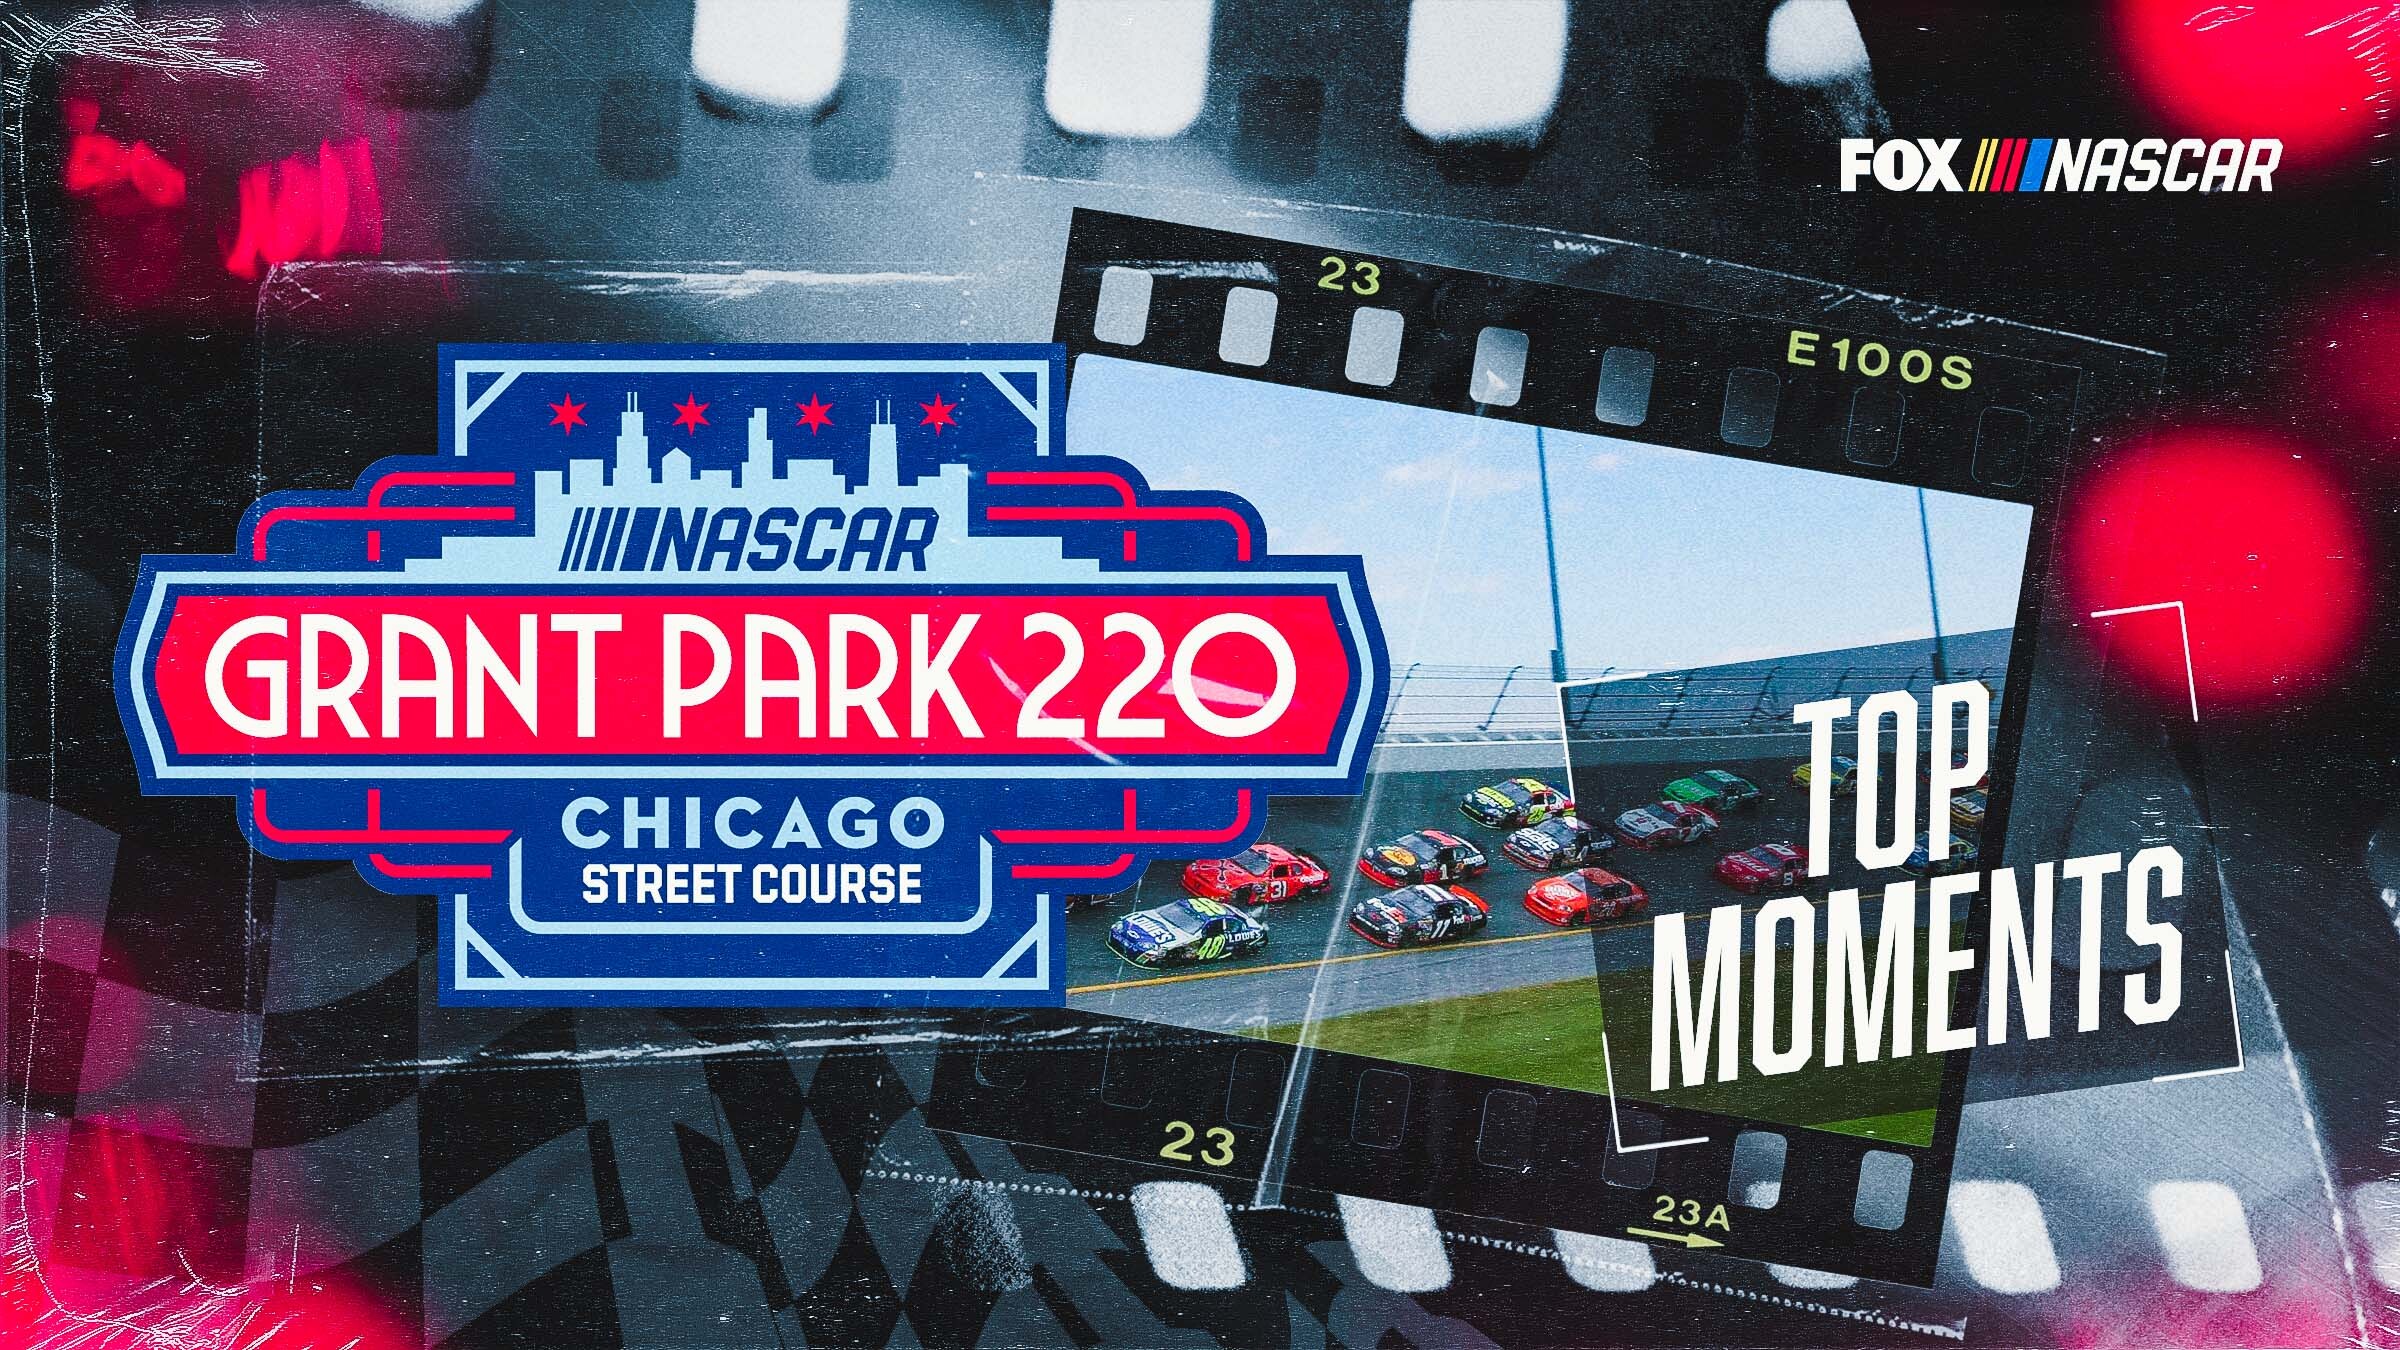 Grant Park 220 live updates: Top moments from the Chicago Street Course